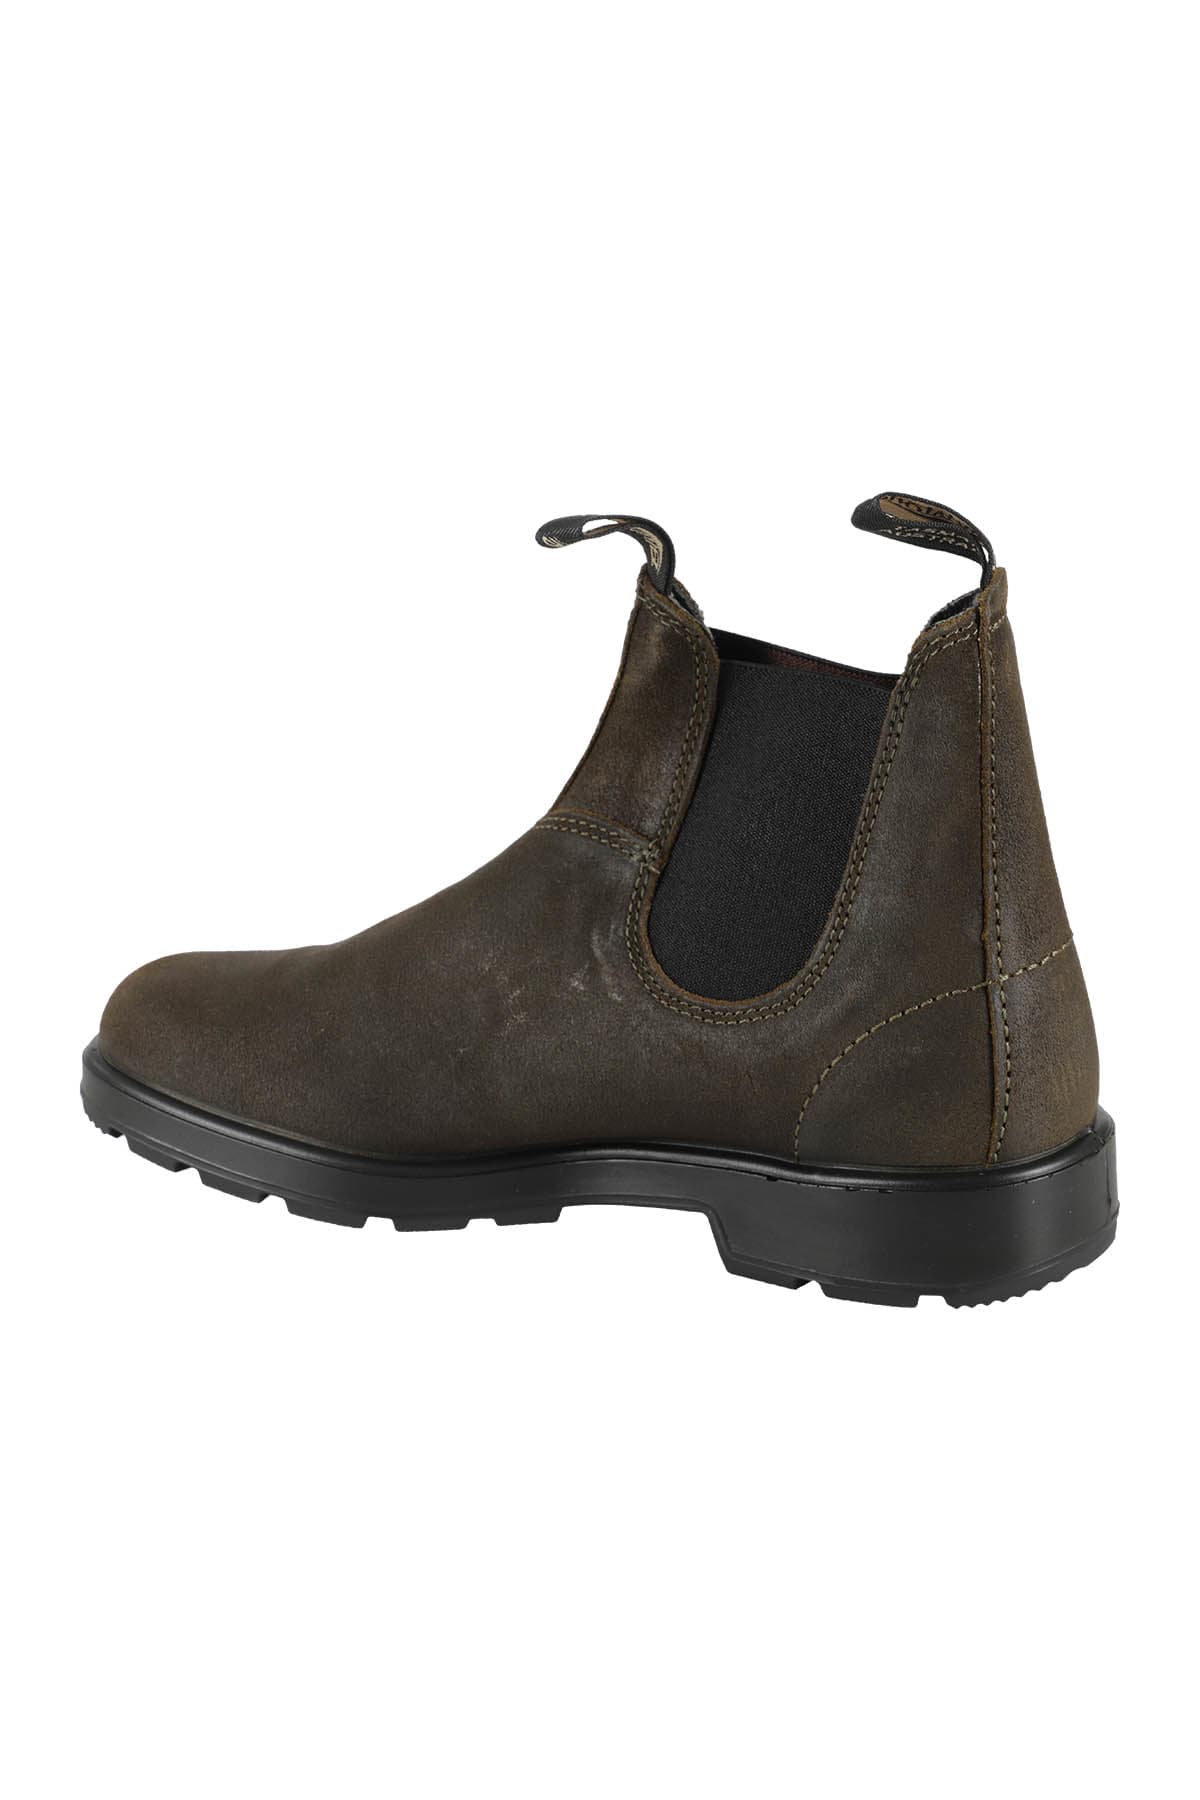 Shop Blundstone Waxed Suede In Olive Suede Black